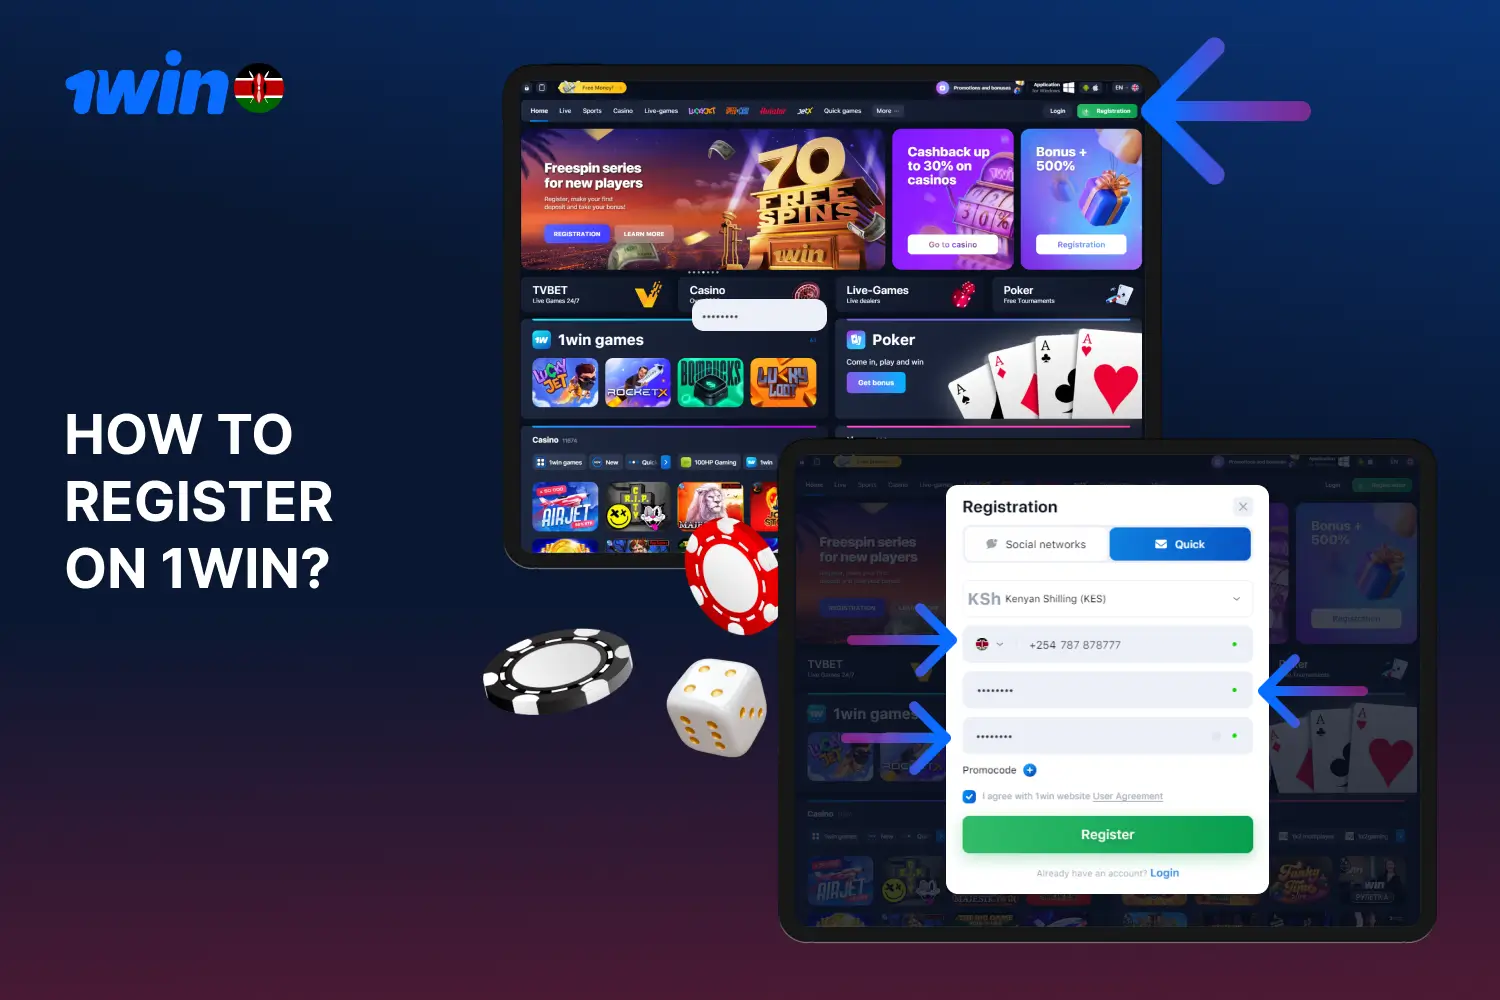 Users from Kenya can register on 1win casino in a few clicks